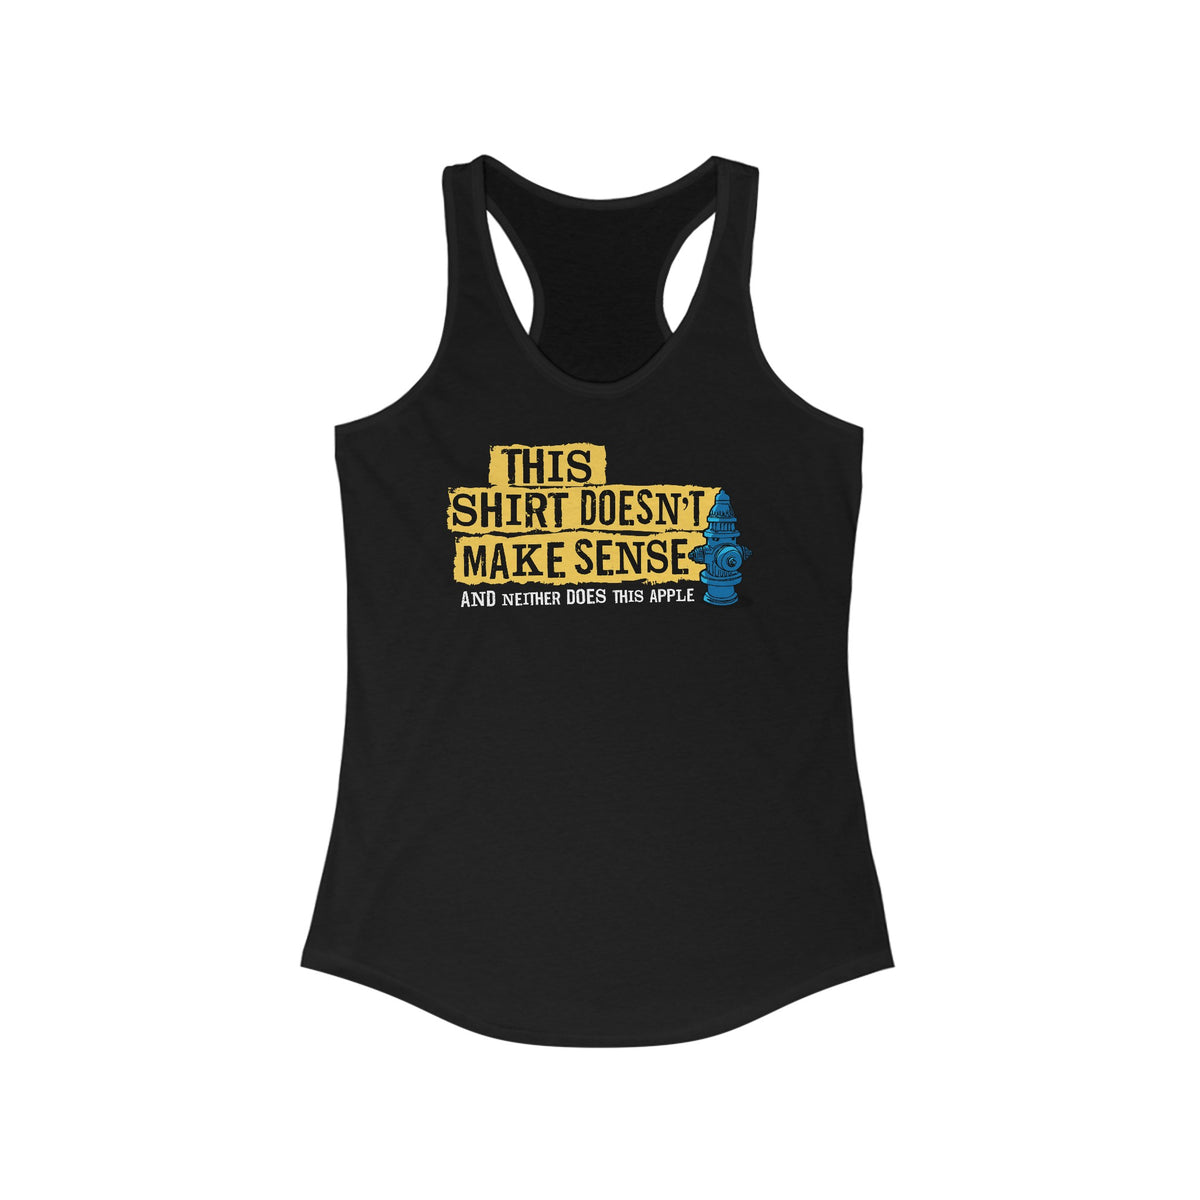 This Shirt Doesn't Make Sense And Neither Does This Apple -  Women’s Racerback Tank